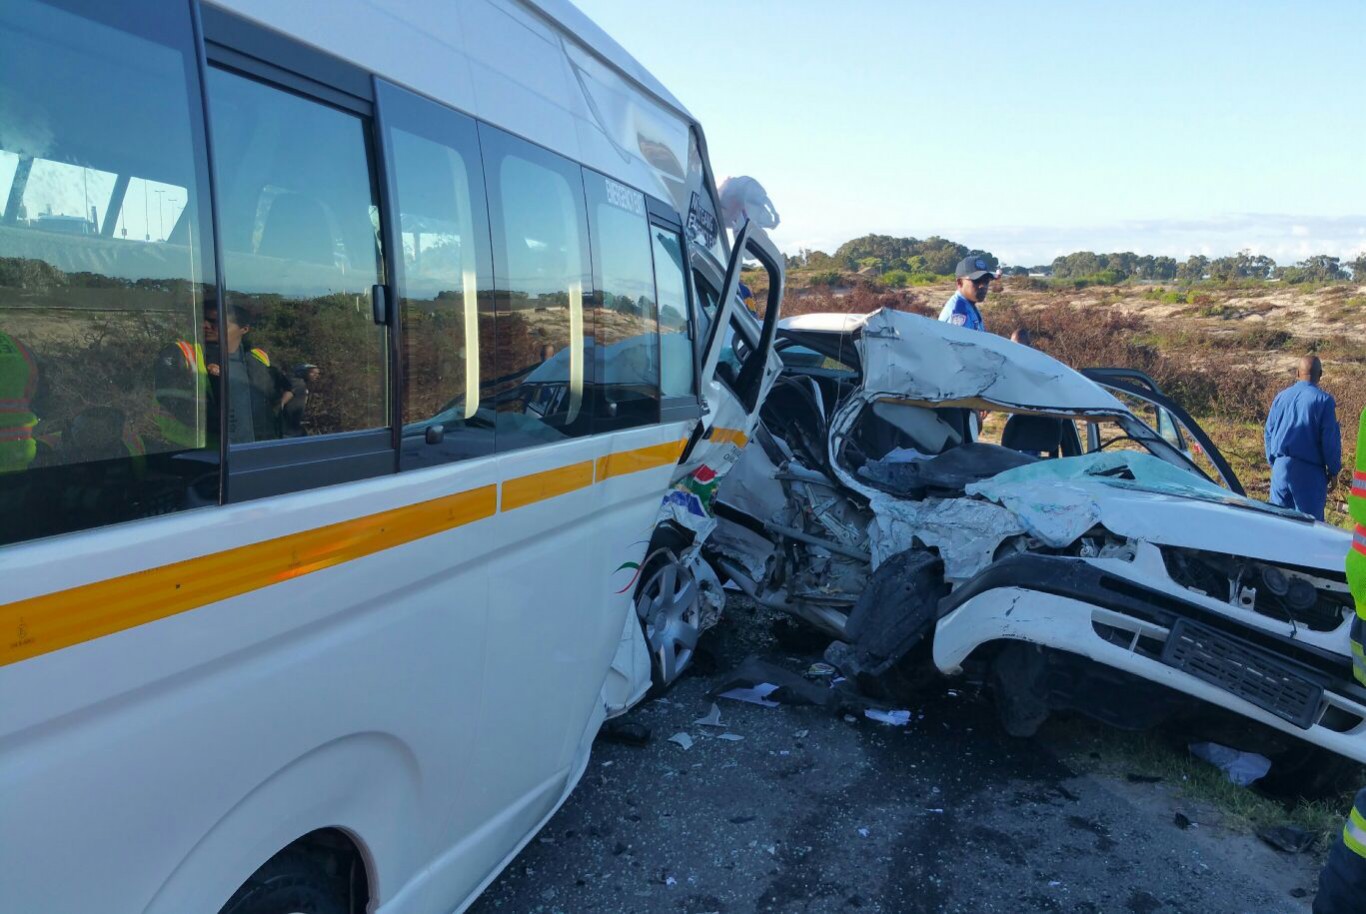 Several vehicles collide on Jakes Gerwel Road in Mitchells Plain killing one man